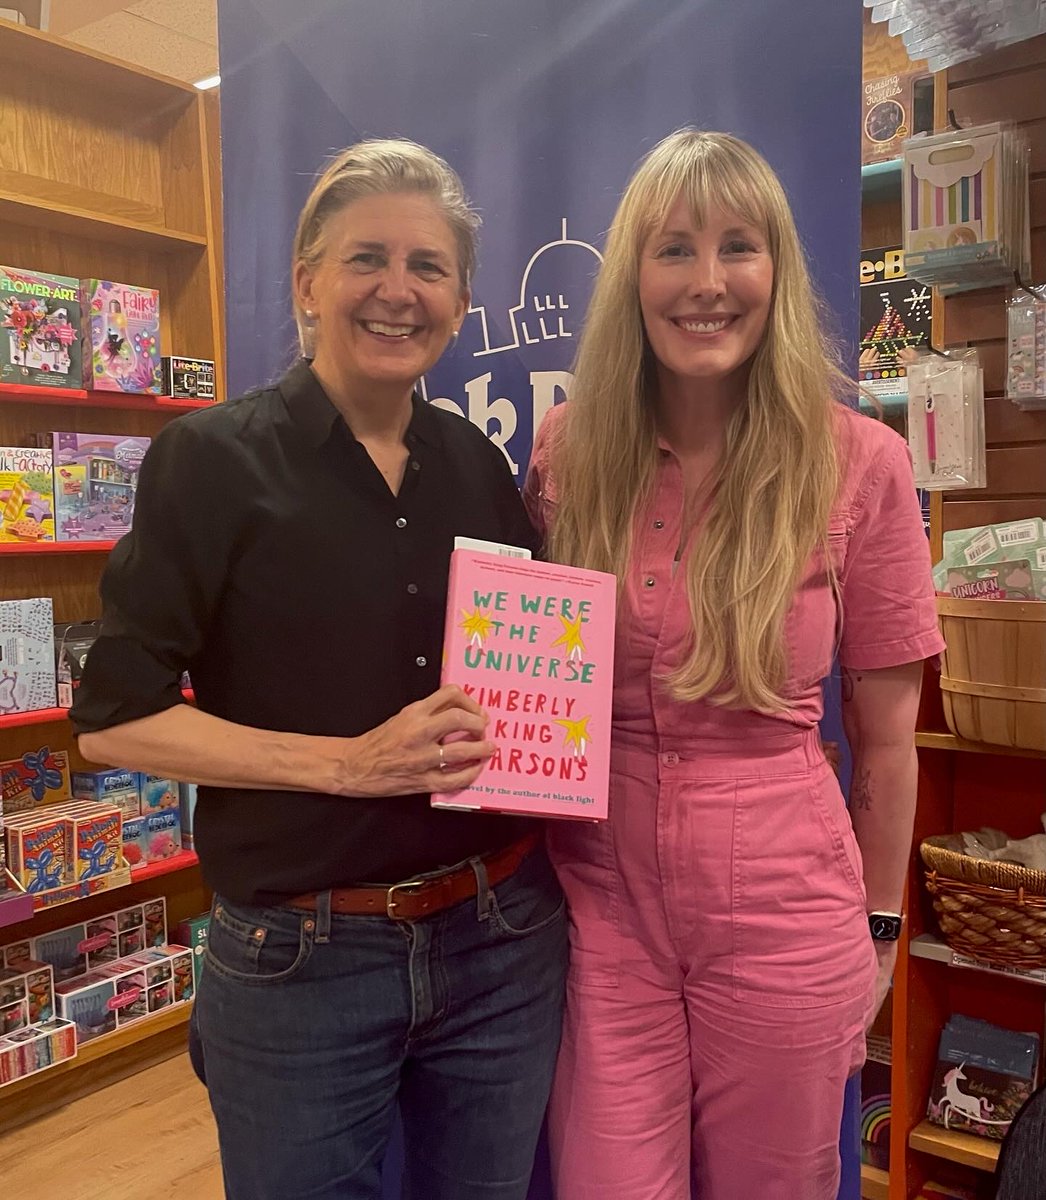 So great to see Kimberly King Parsons talk abt WE WERE THE UNIVERSE at @bookpeople. With her friend Mitchell Jackson, she talked about class & place, leaning into shame, how grief changes the nature of time & more. Loved the stories of BLACK LIGHT. Can't wait to read her novel.